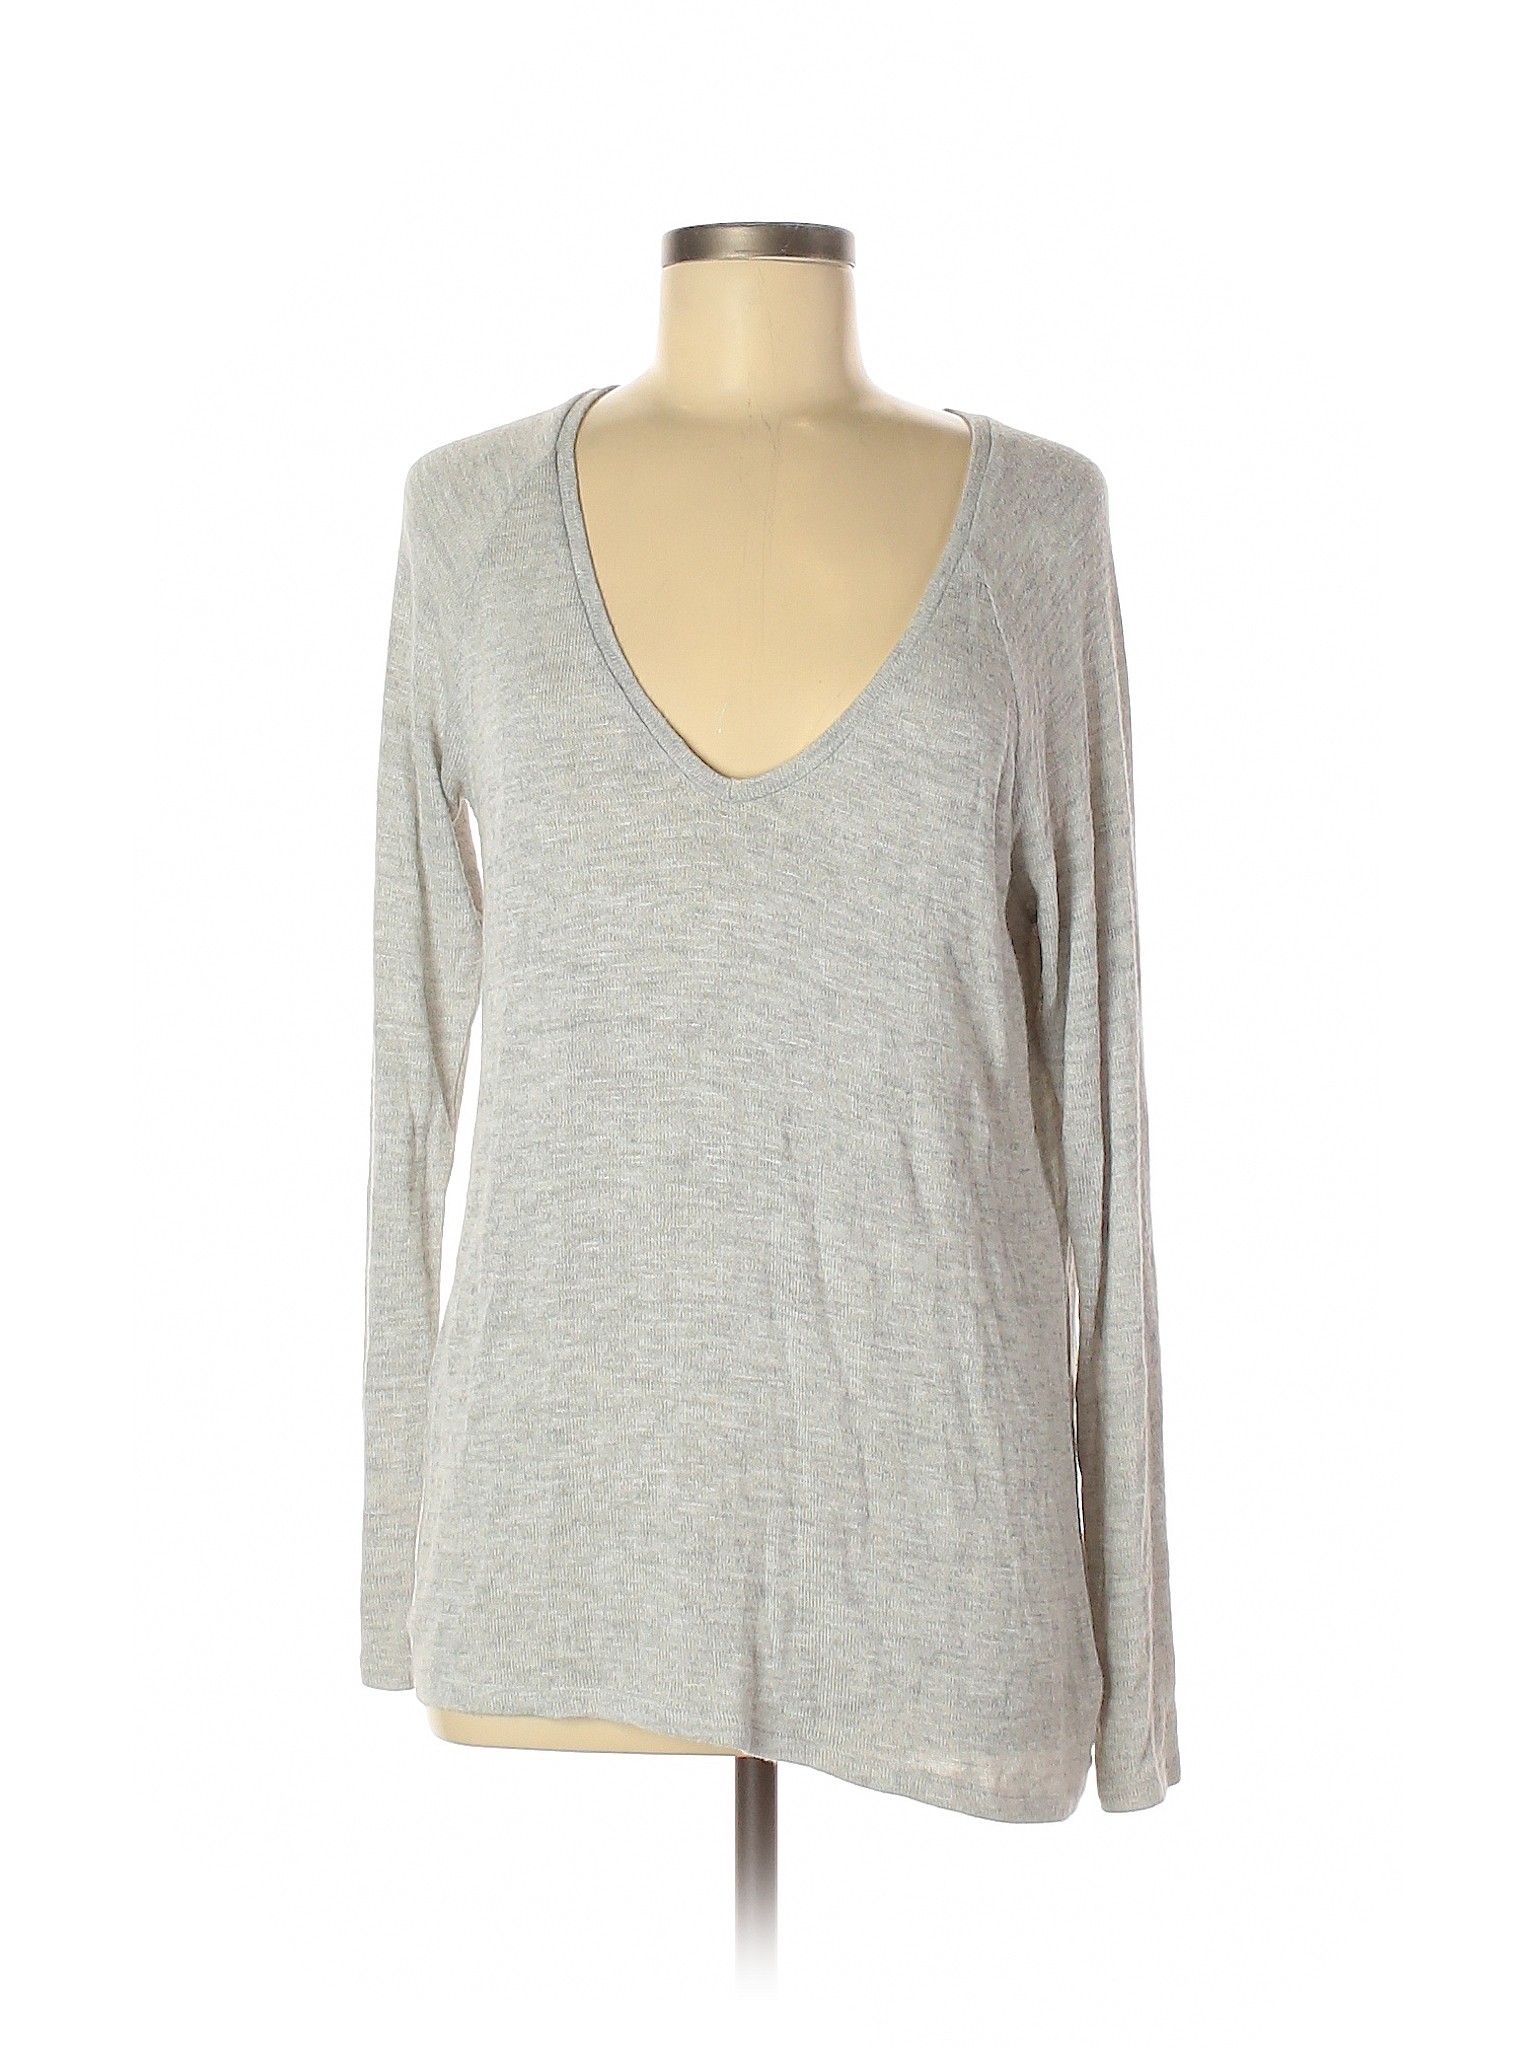 American Eagle Outfitters Women Gray Long Sleeve Top M | eBay